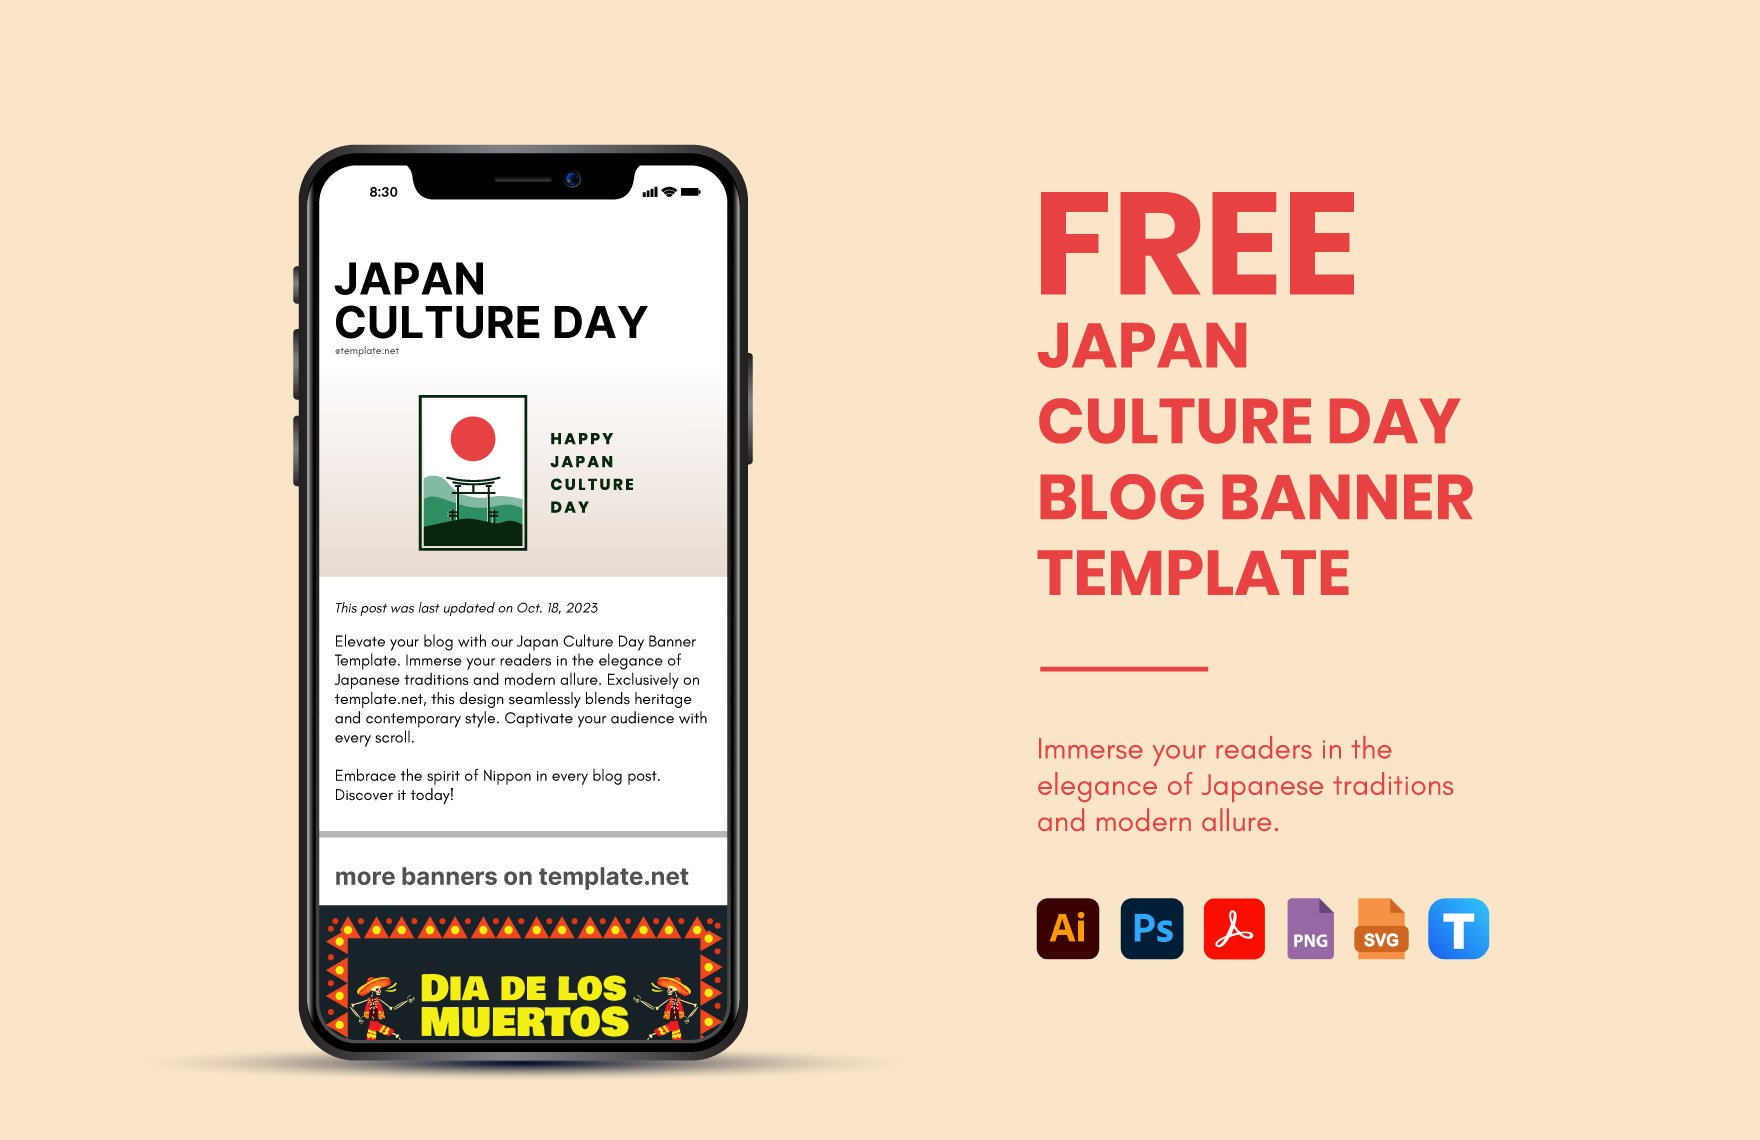 Japan Culture Day Blog Banner Template